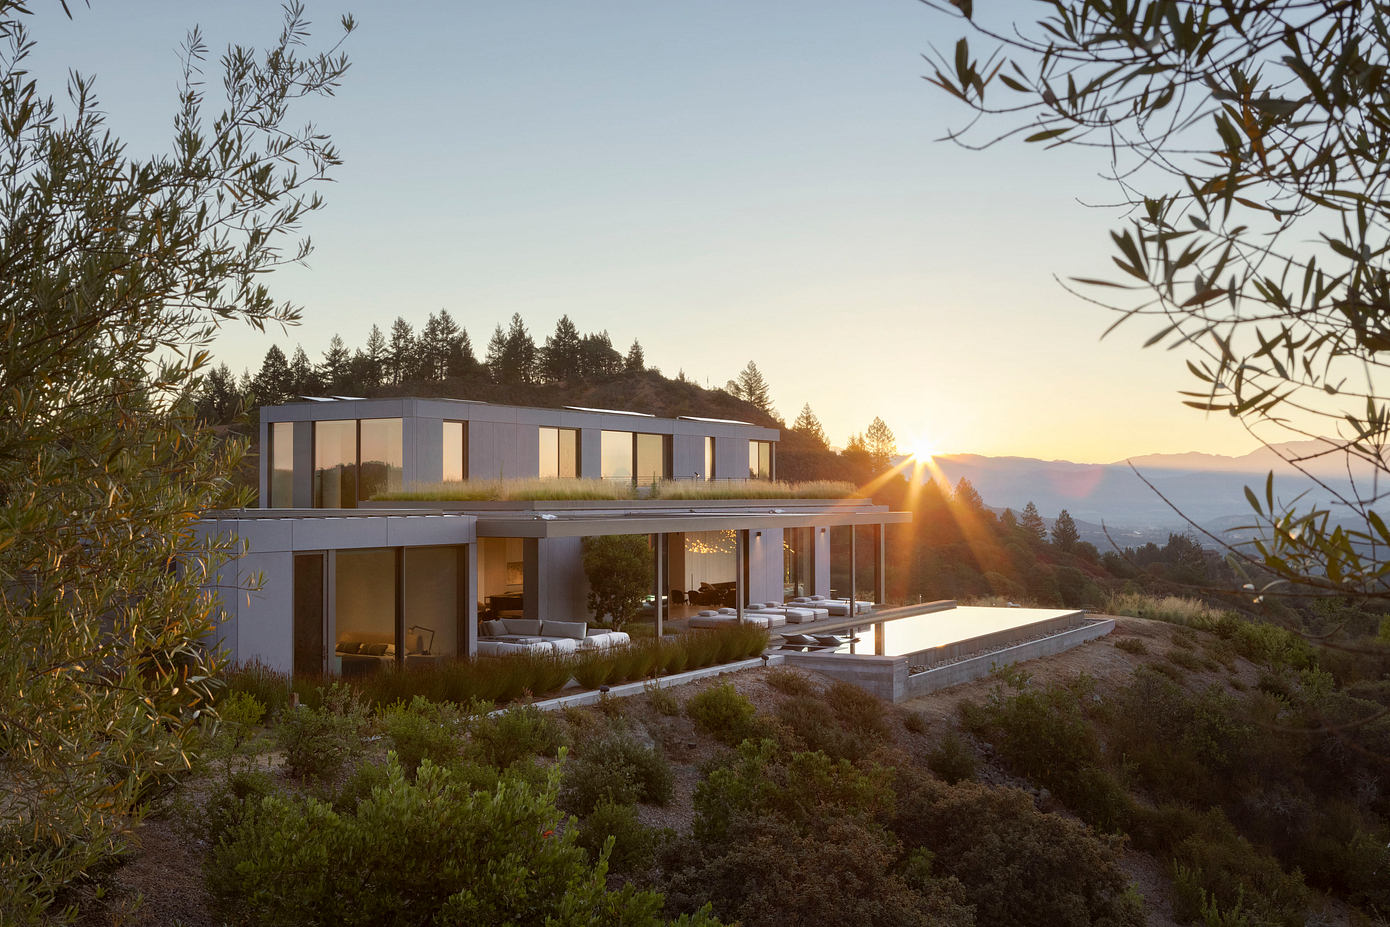 The Phoenix: A Modern Healdsburg Home Rises from the Ashes